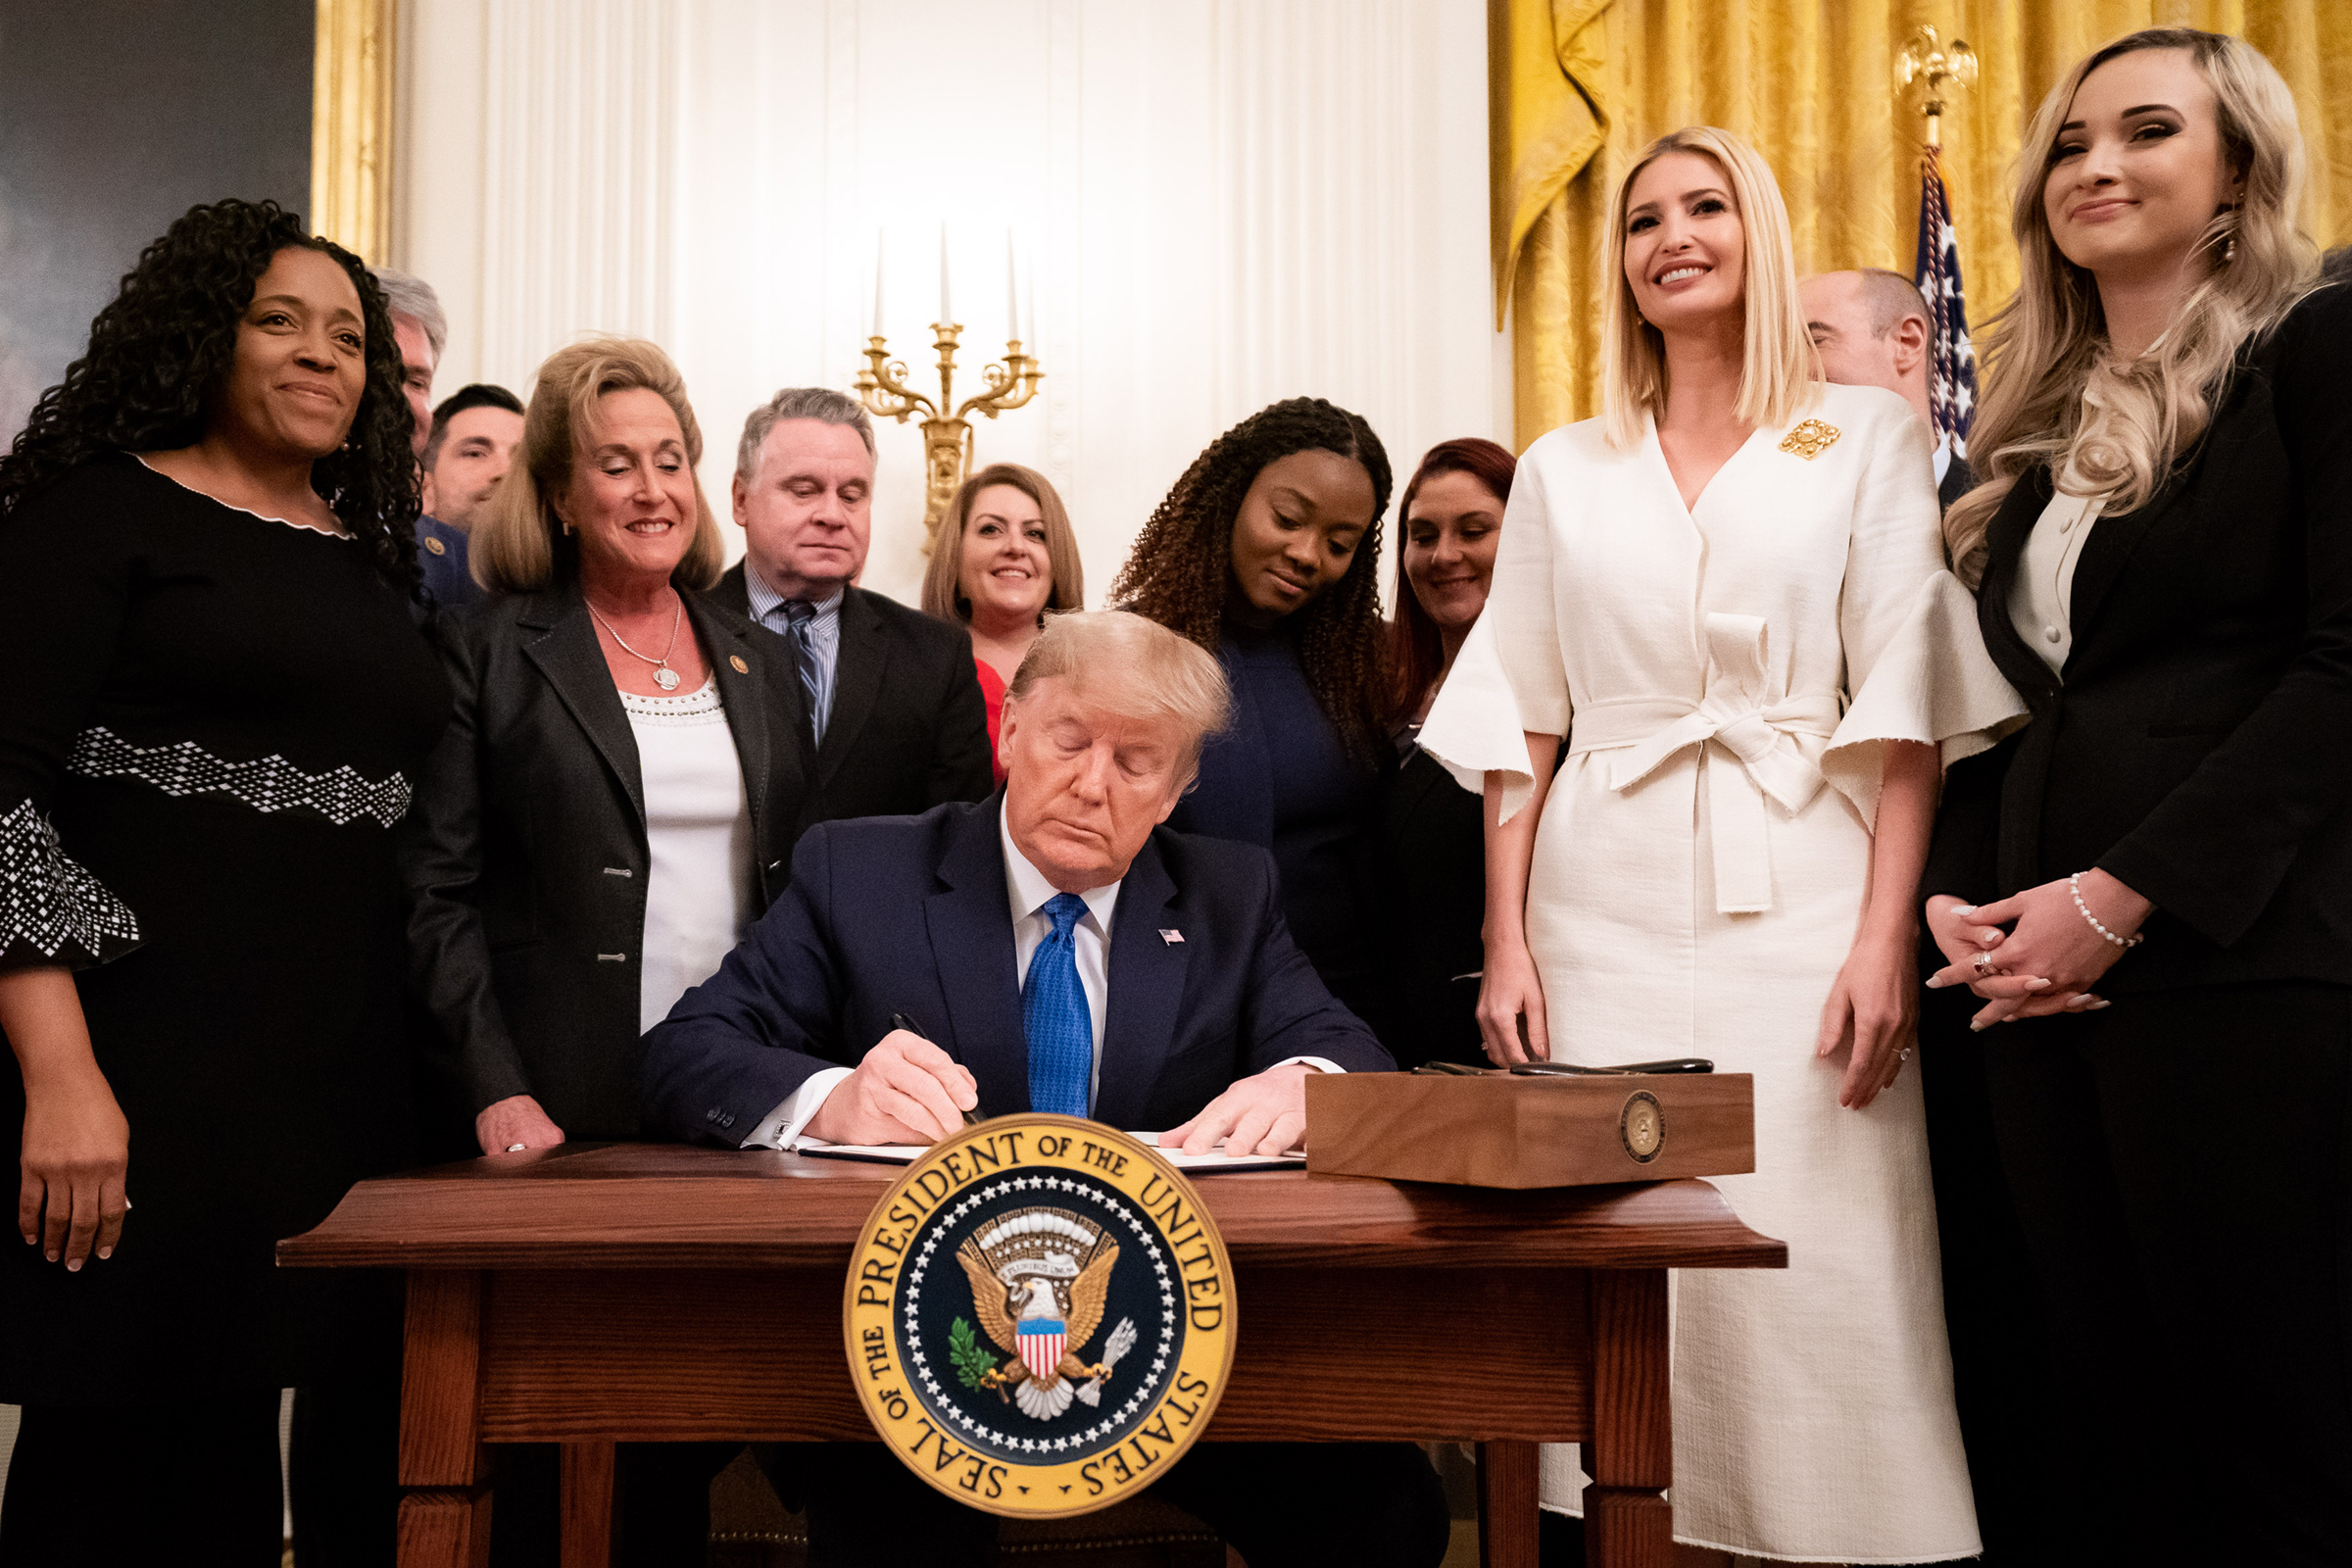 President Donald J. Trump signs an Executive Order for Combating Human Trafficking and Online Child Exploitation in the United States, at the White House Summit on Human Trafficking on Jan. 31, 2020. (Sipa)